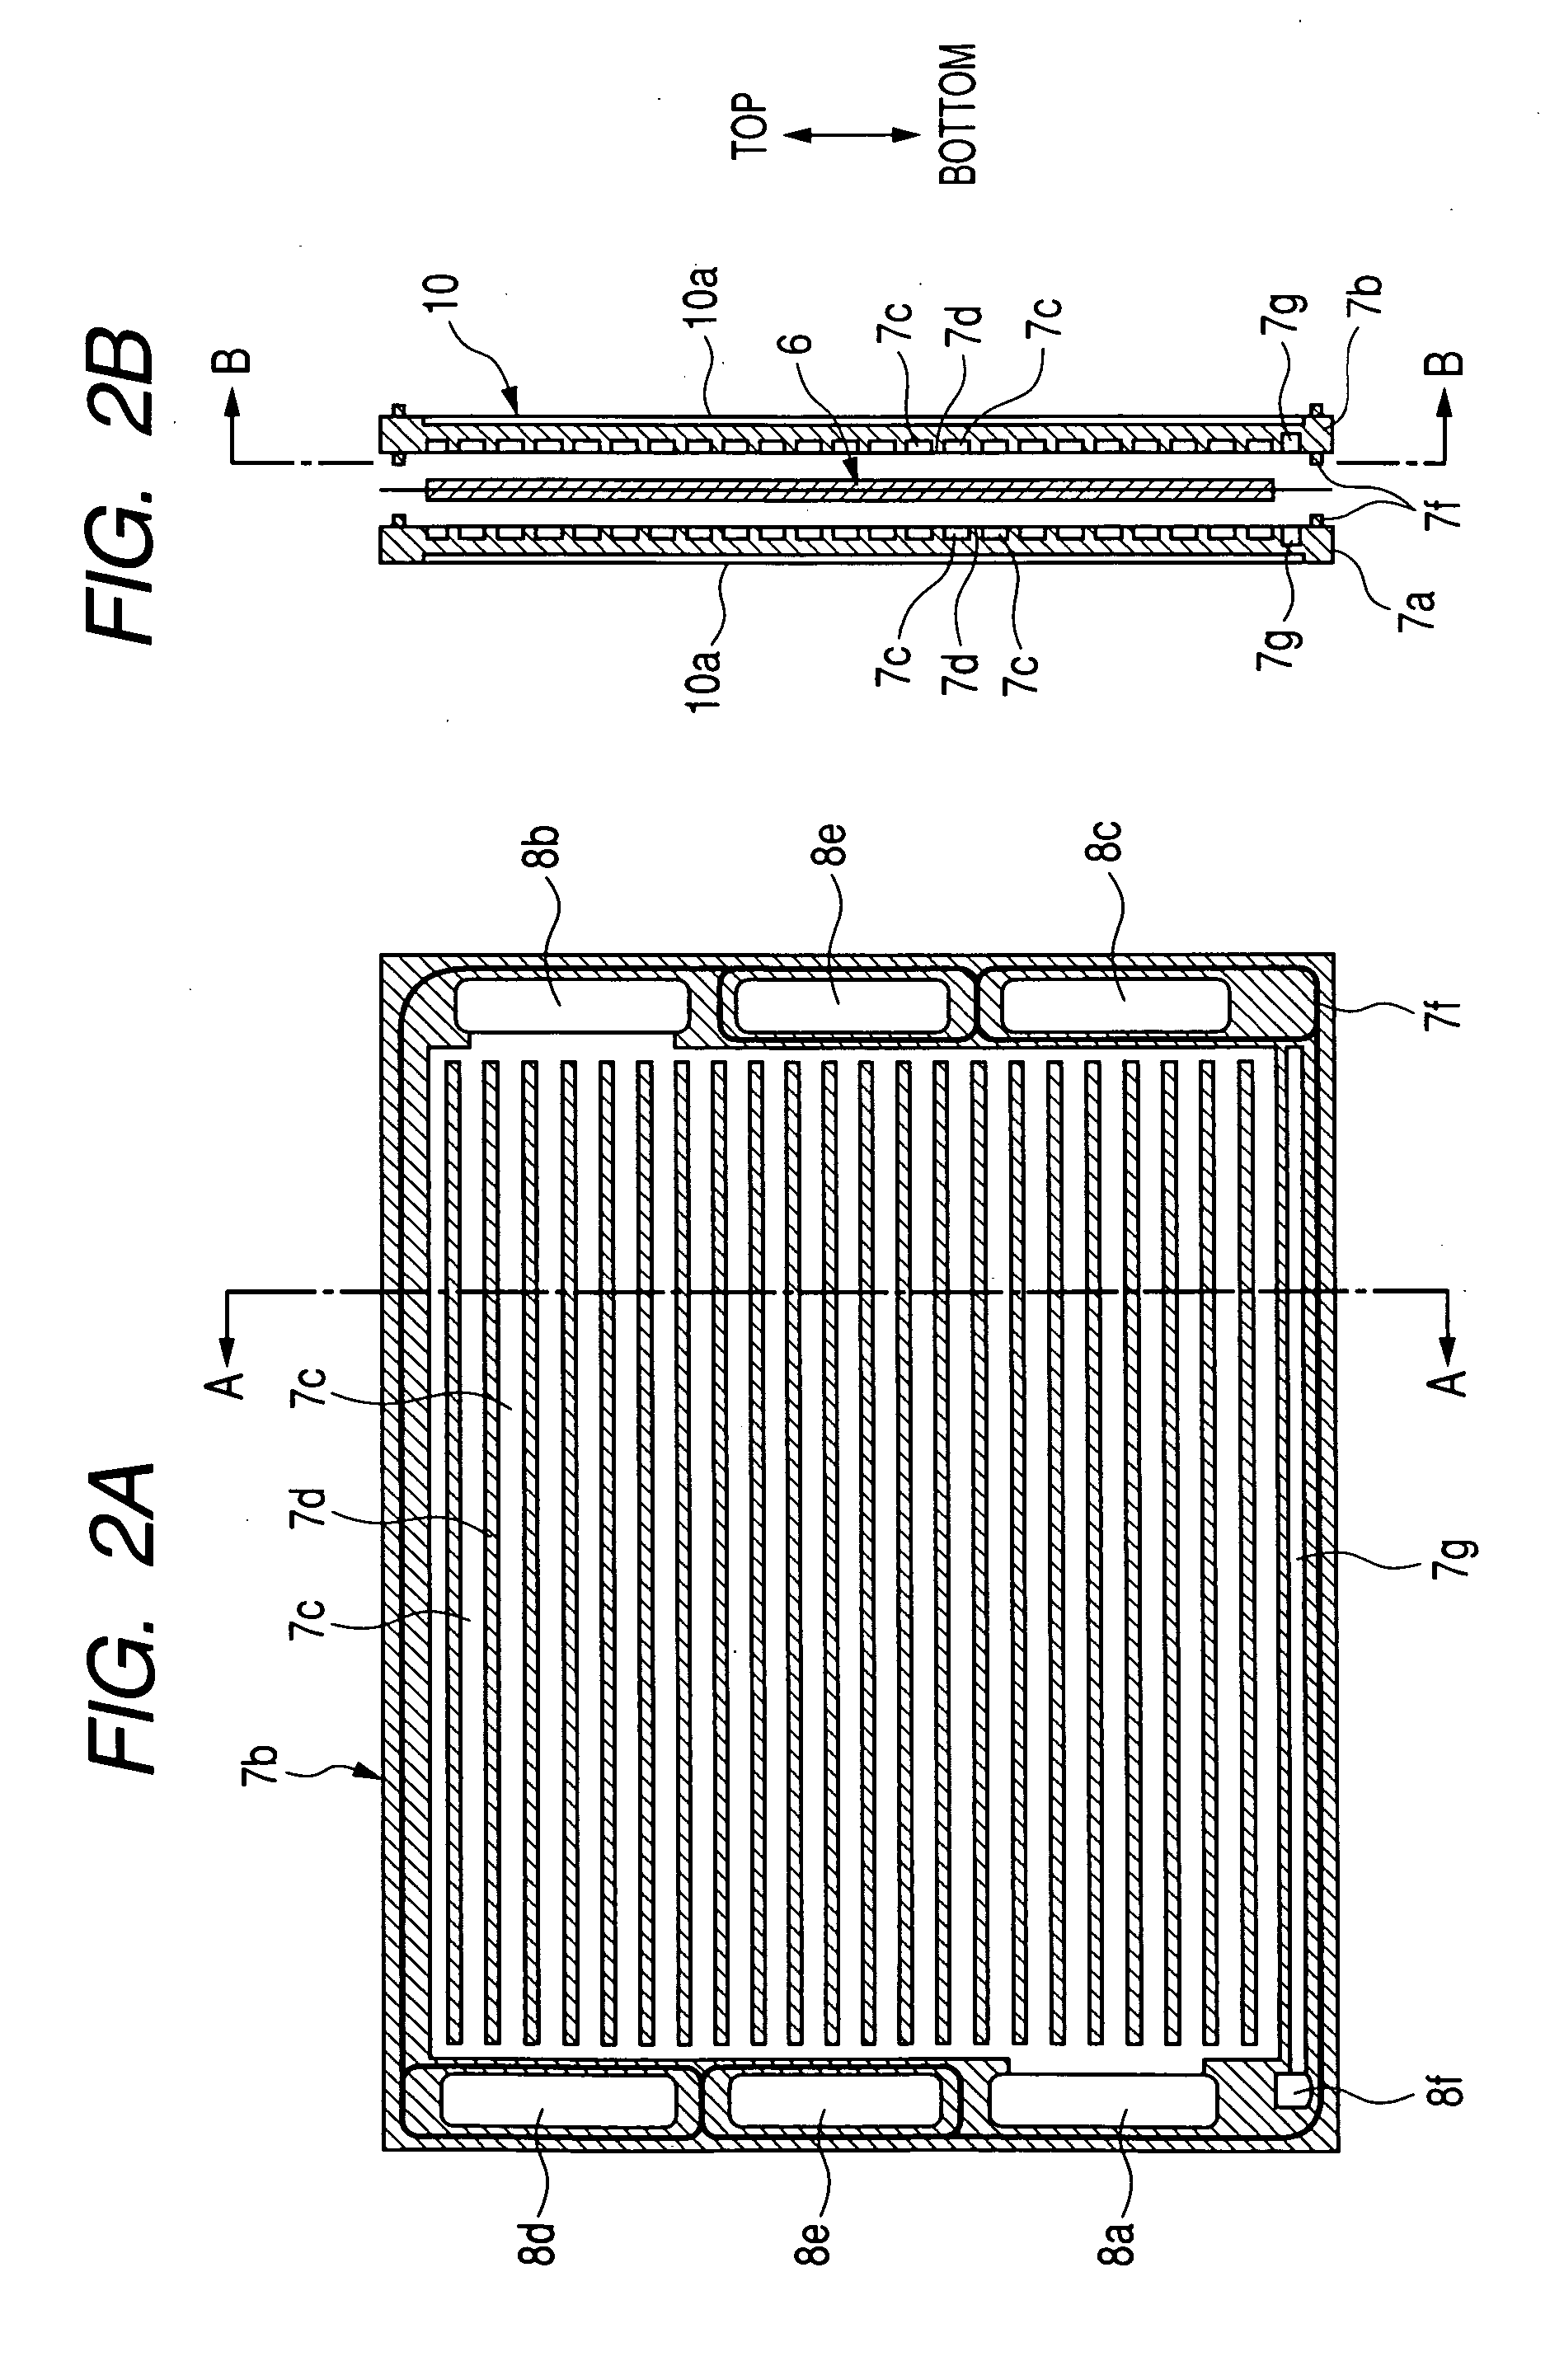 Fuel cell, fuel cell stack, and fuel cell system